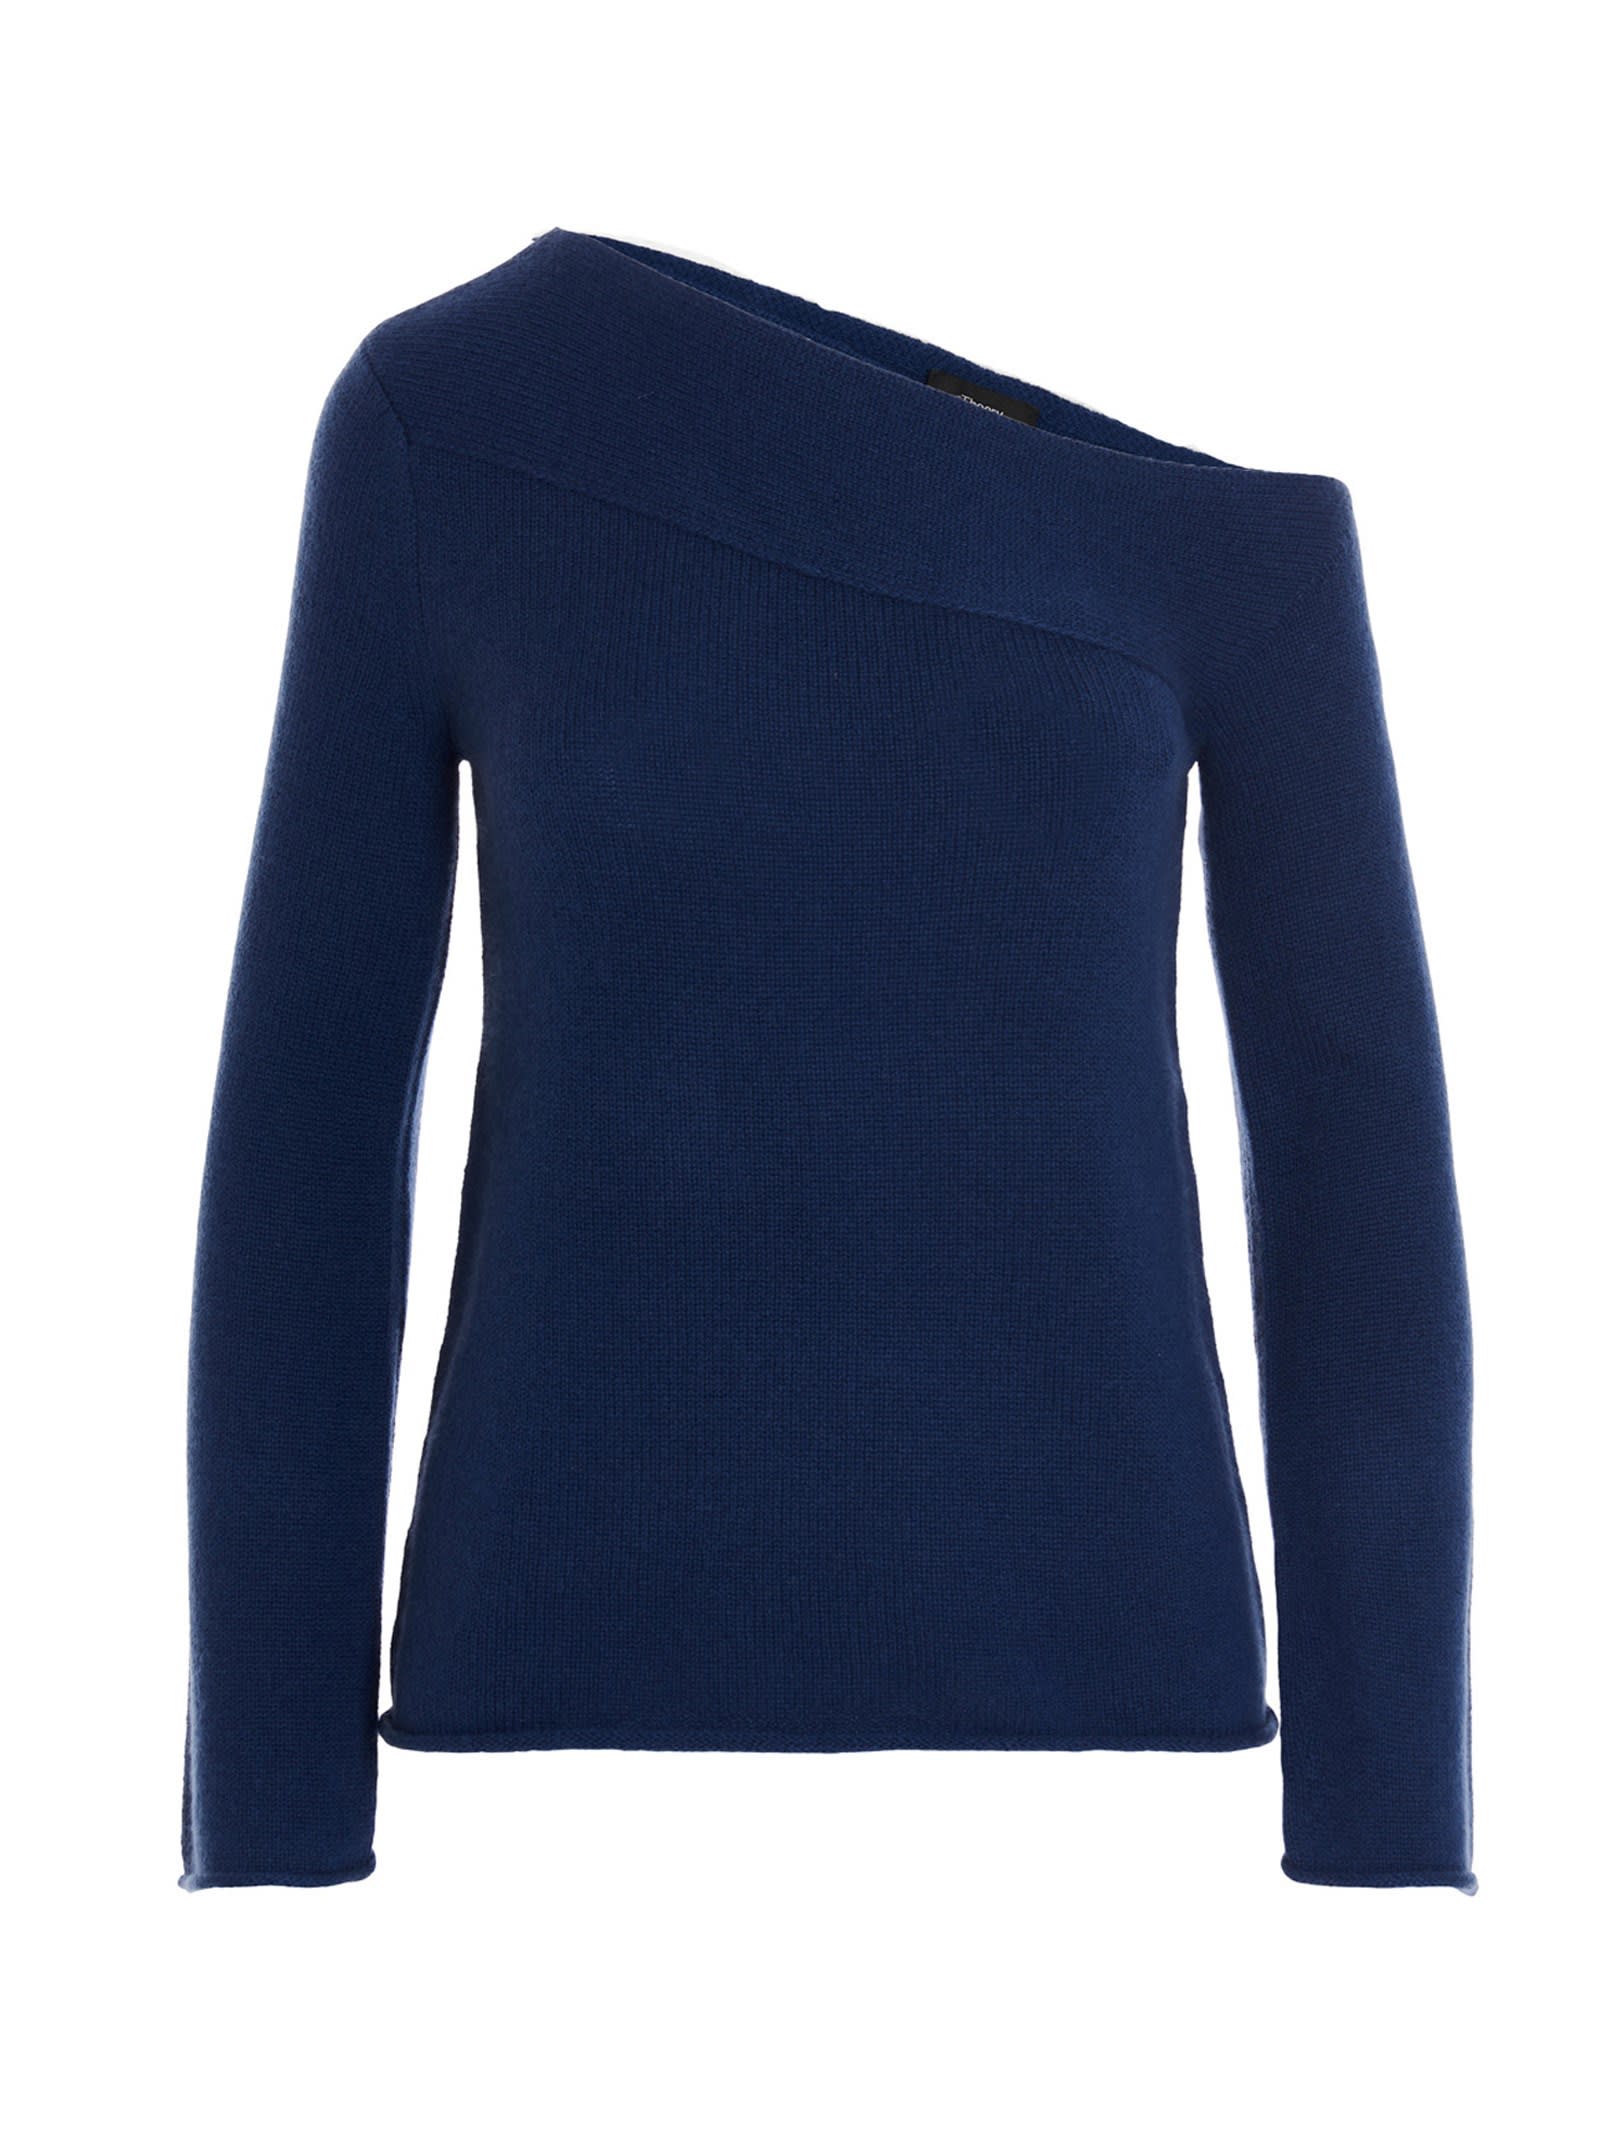 Theory Asymmetric Cashmere Sweater